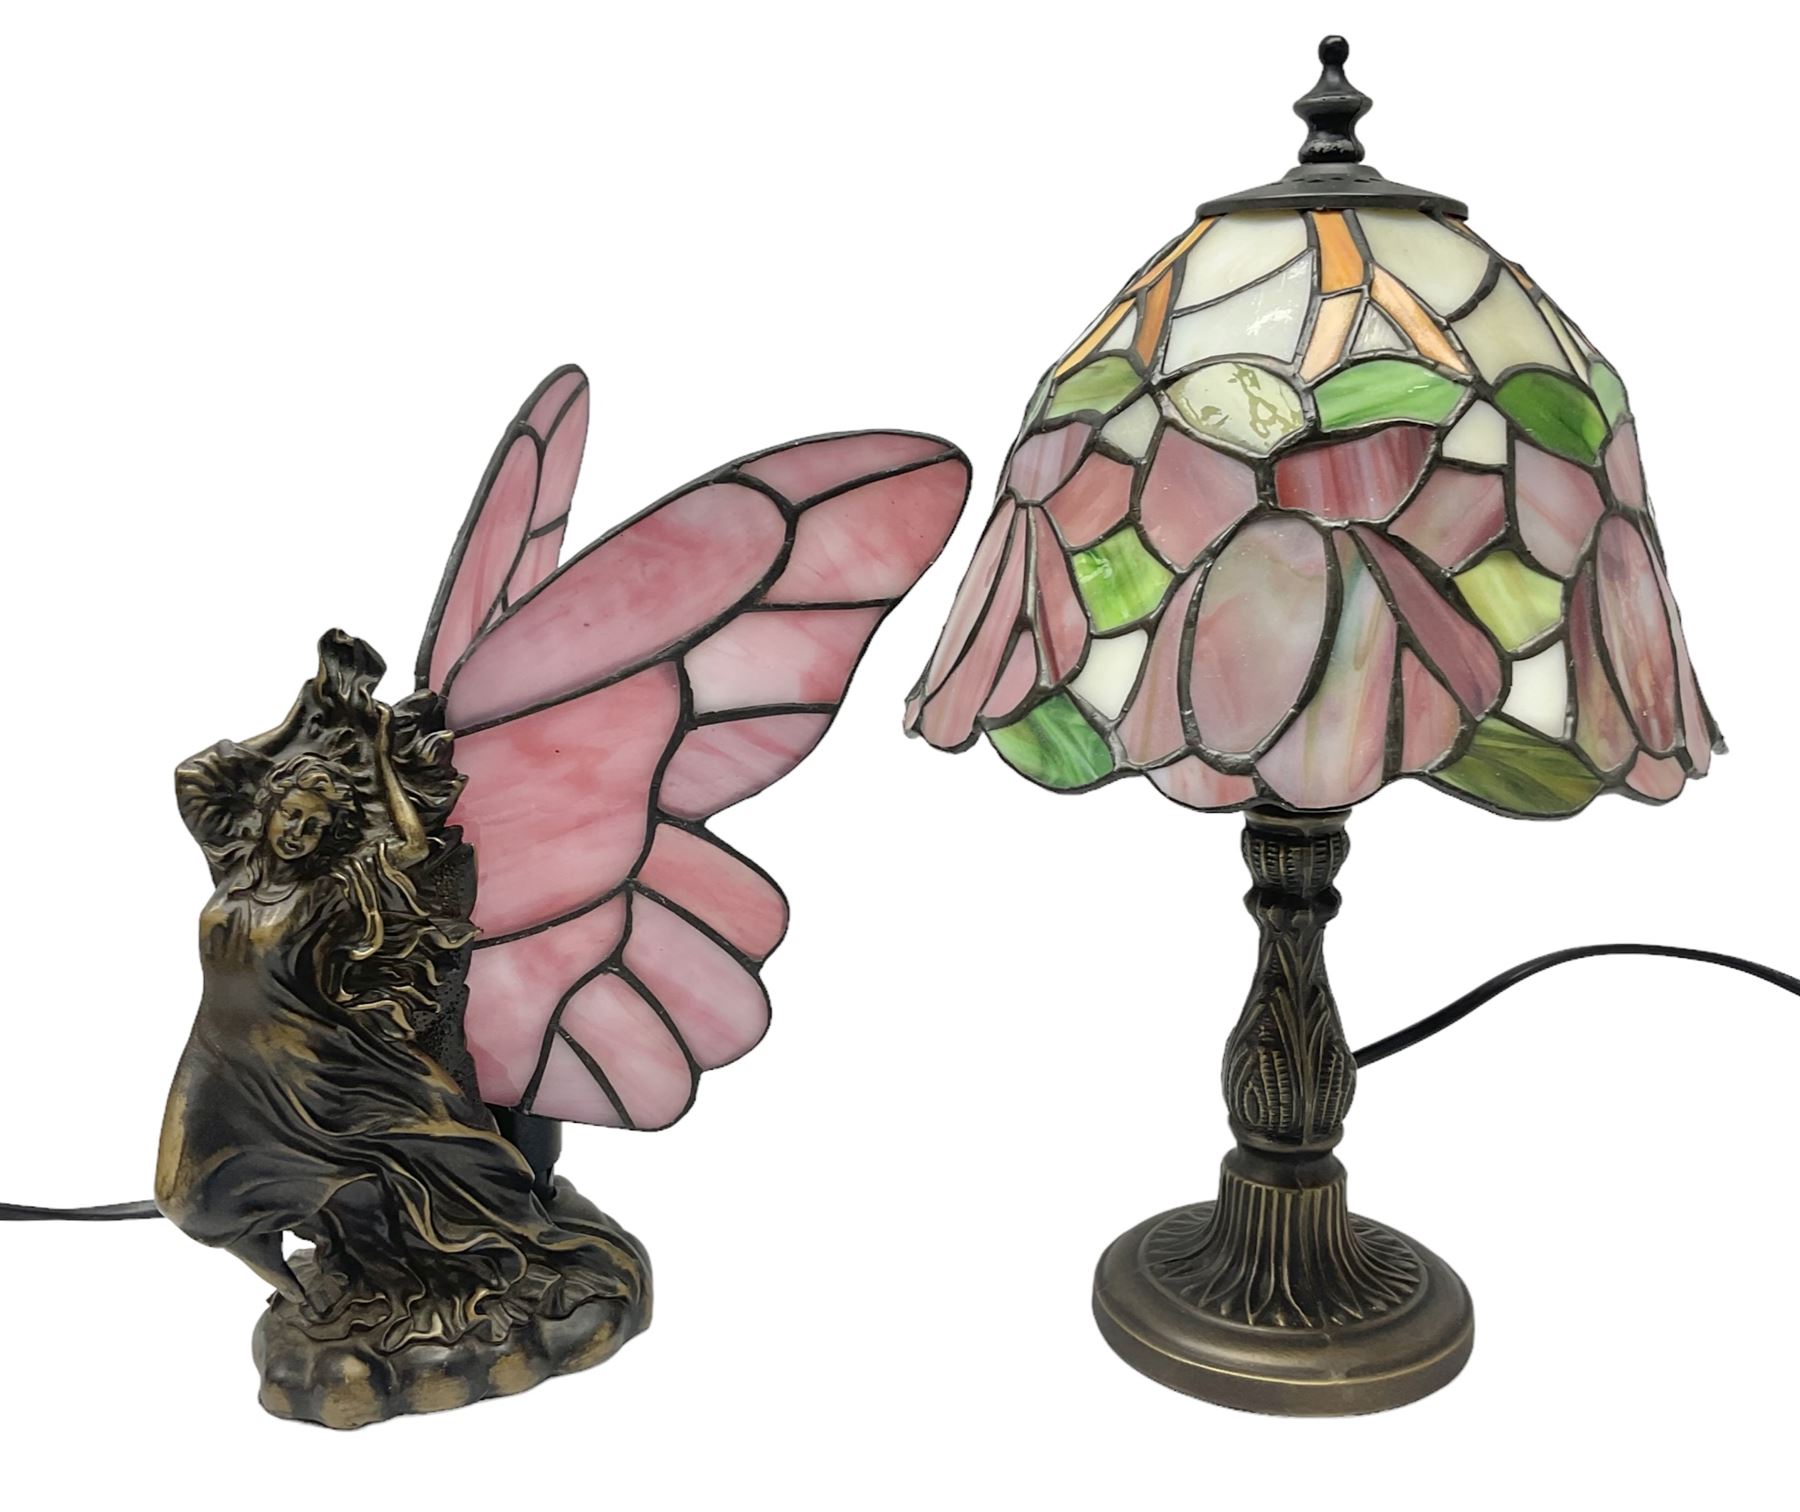 Two Tiffany style lamps